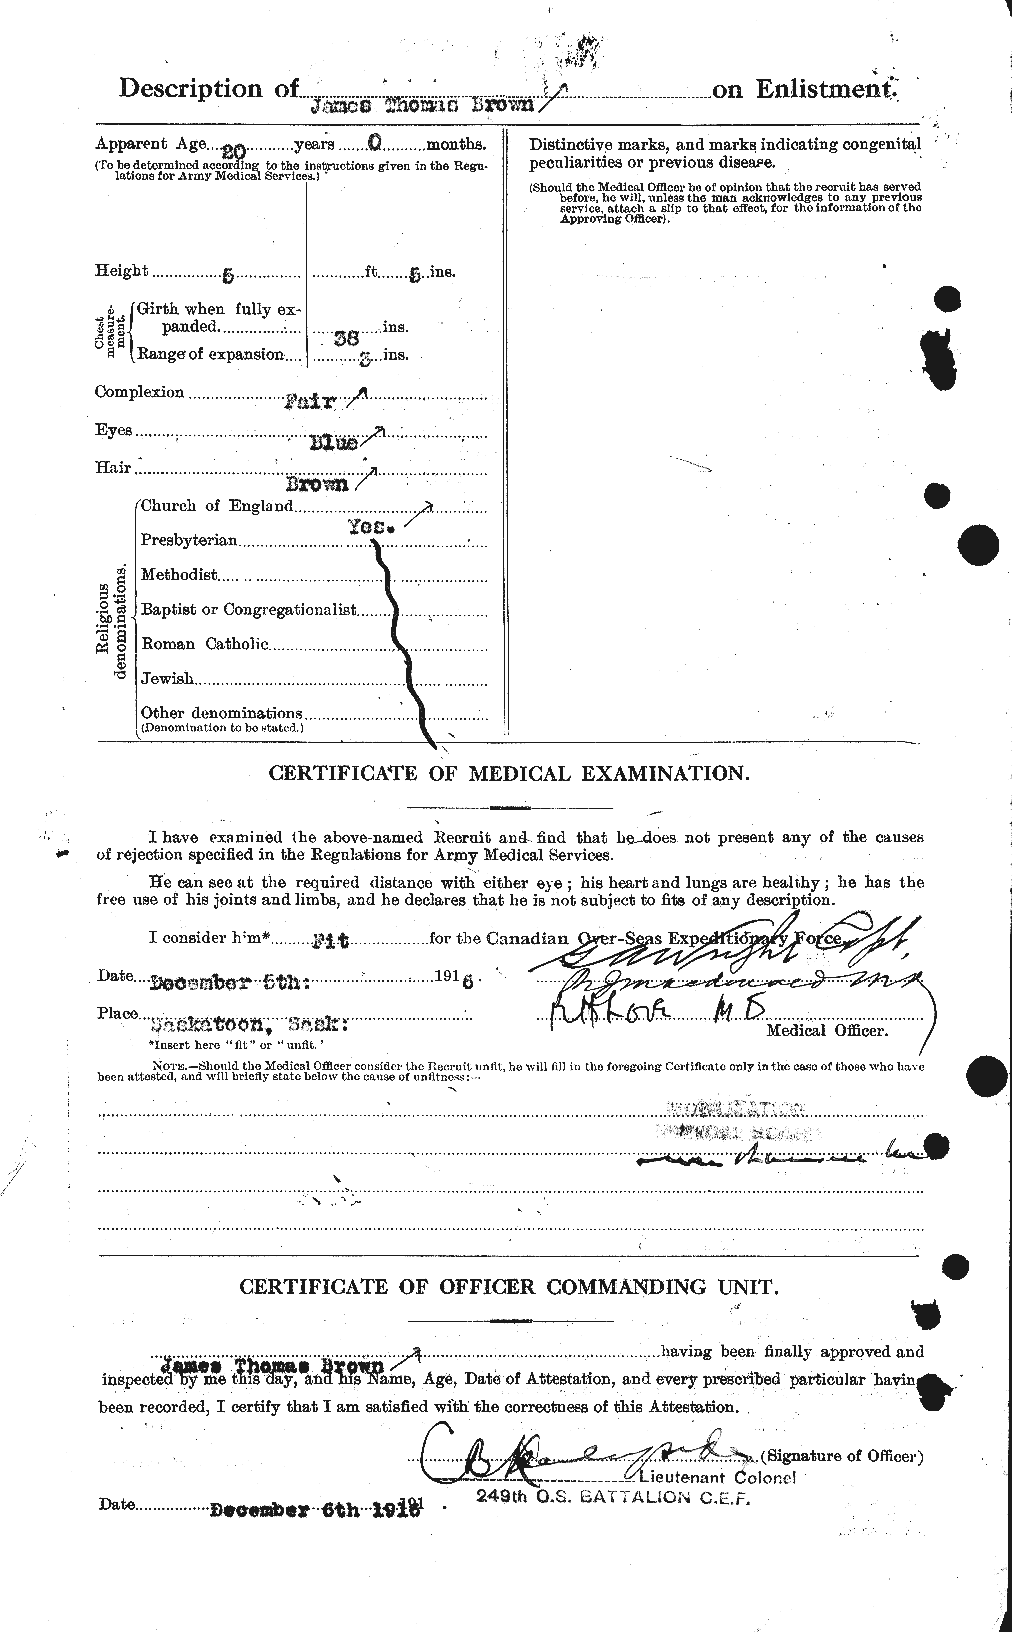 Personnel Records of the First World War - CEF 269589b